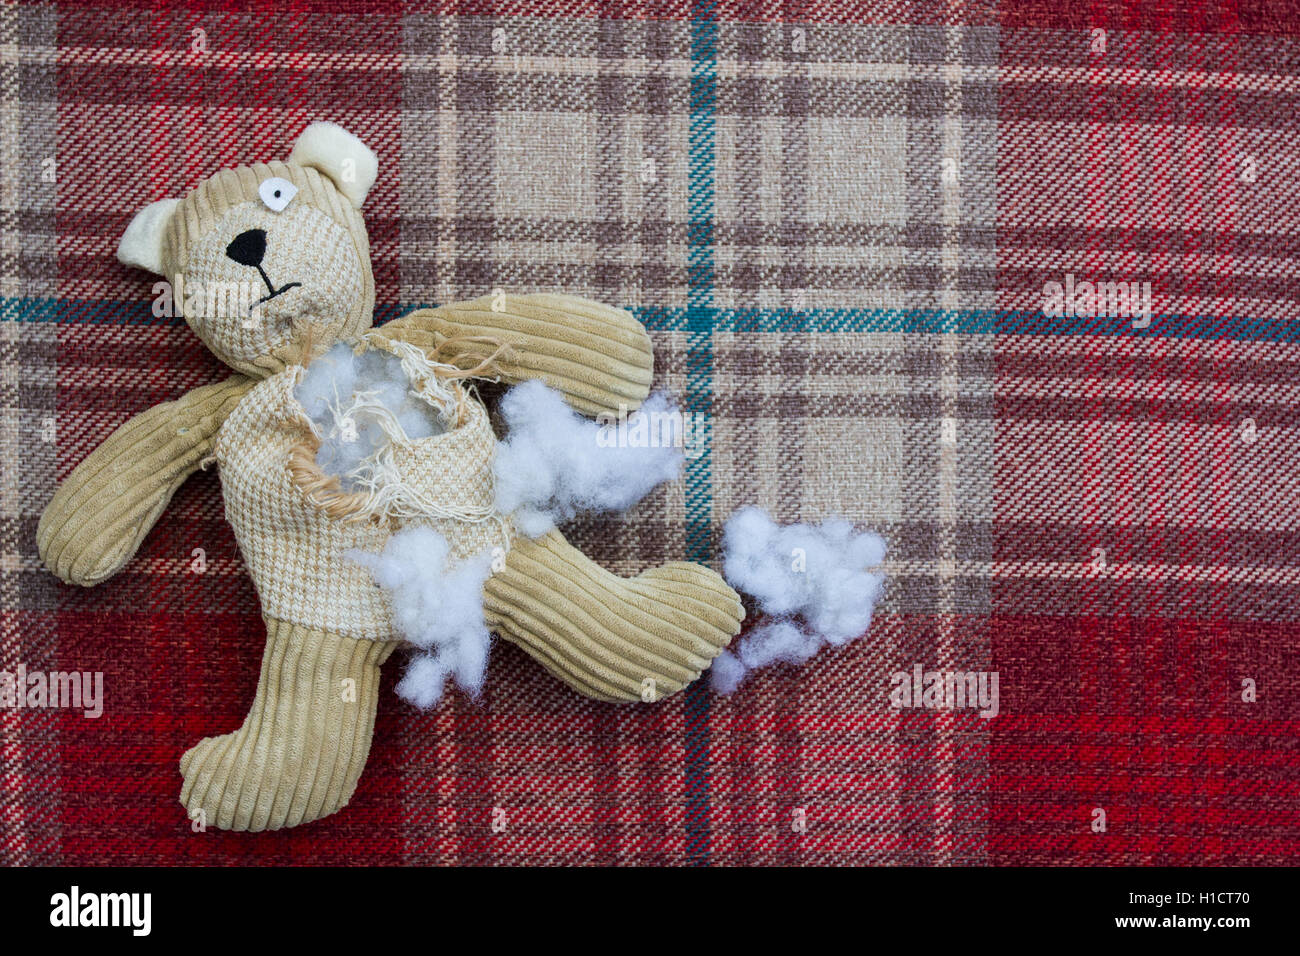 a-ripped-and-torn-teddy-bear-with-a-hole-in-its-tummy-waiting-to-be-H1CT70.jpg